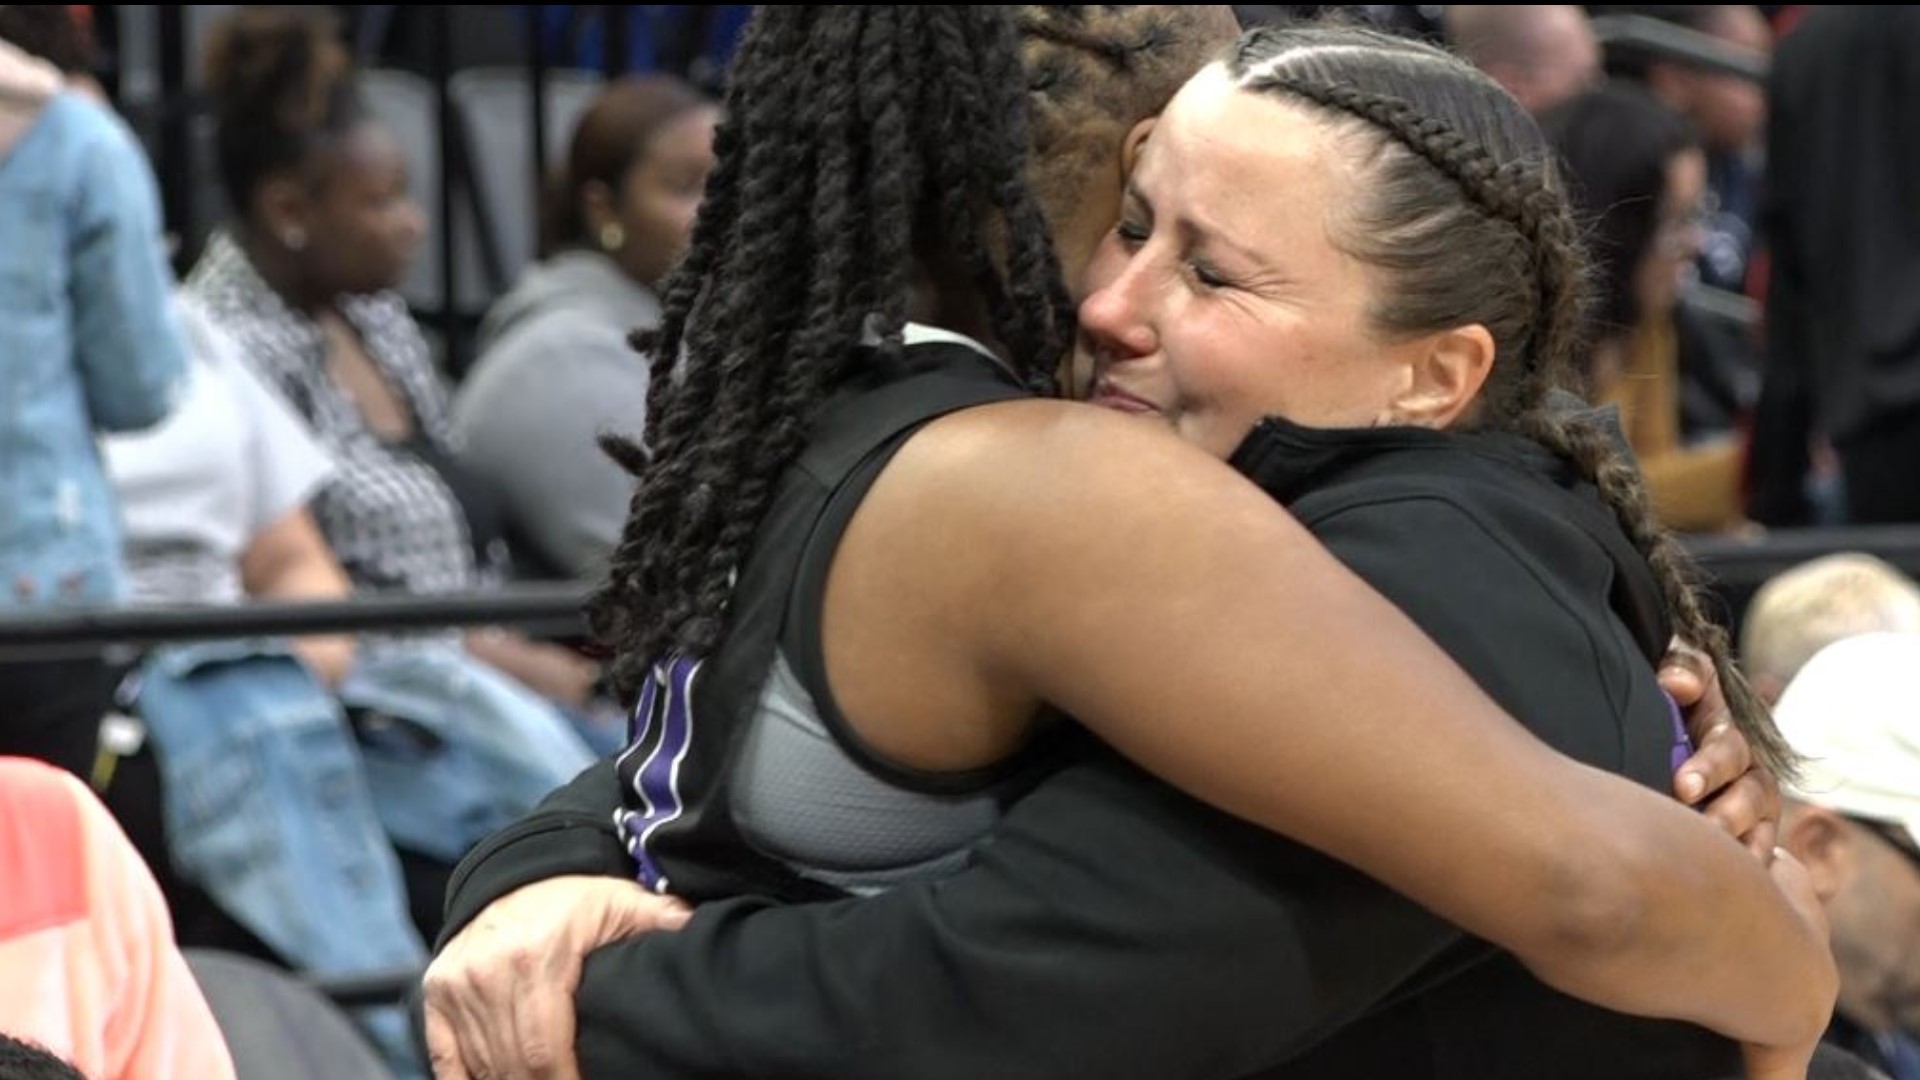 The Sacramento Lady Dragons came away with their sixth girls Section Championship since 2005, by edging the top-seeded Antelope Titans 62-61 in a thriller from Golden 1 Center on Friday night. 
Antelope's Jzaniya Harriel, who finished with 20 points and 14 rebounds, fouled Sacramento's Rebekah Brown on the three-point attempt with the game tied. After missing the first two free throws, Brown hit the final free throw to give the Dragons the Section Championship